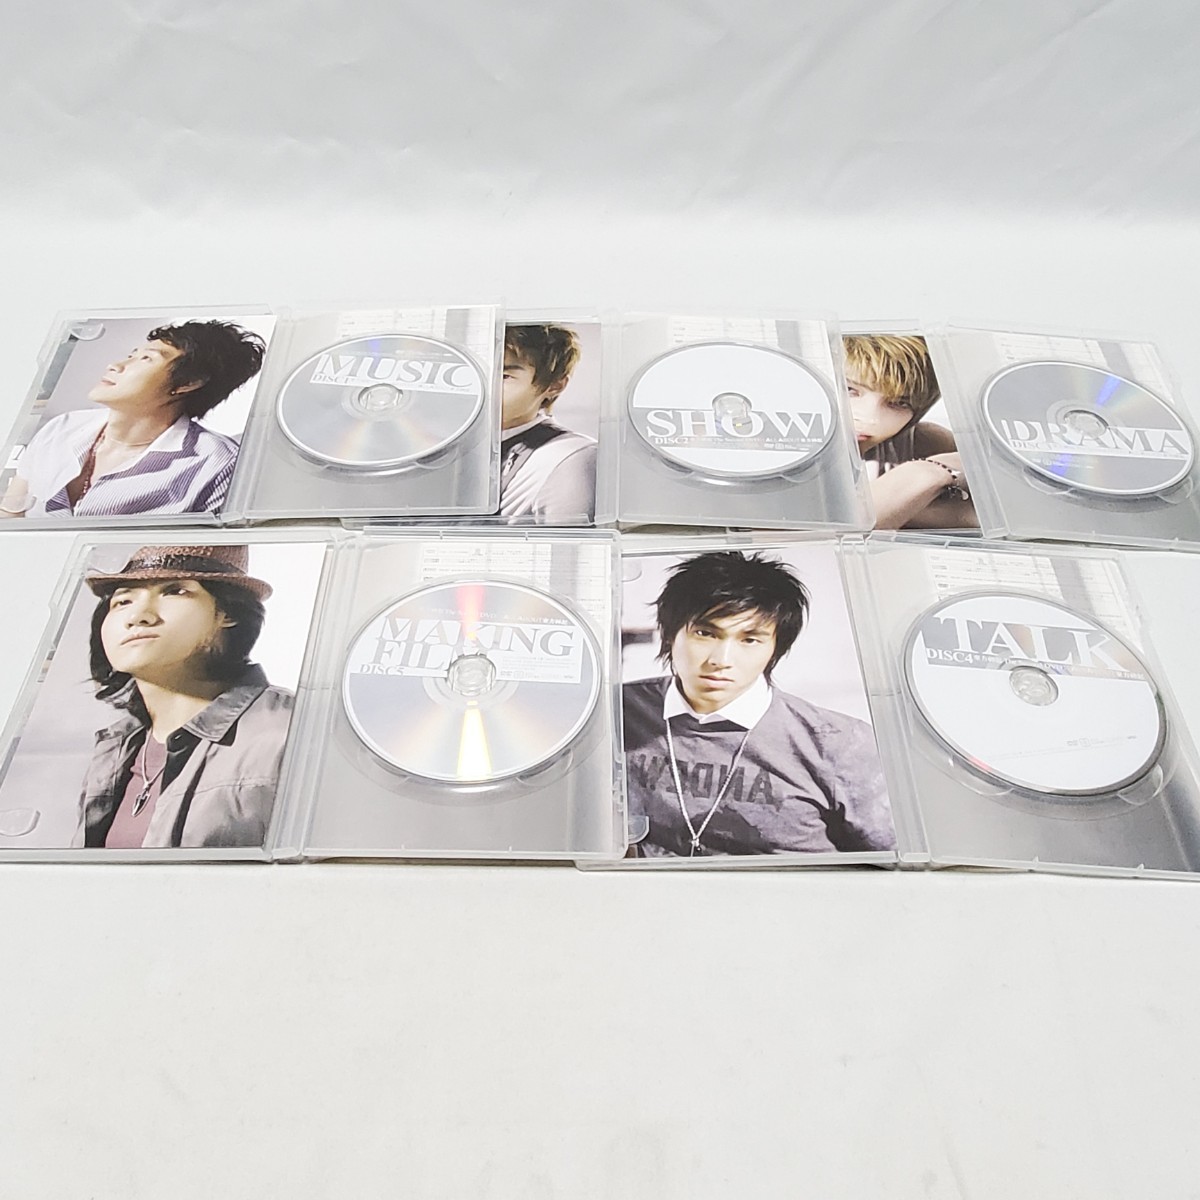 【DVD】東方神起 The Second DVD :: ALLABOUT 東方神起 5組セット ユーズド品_画像4